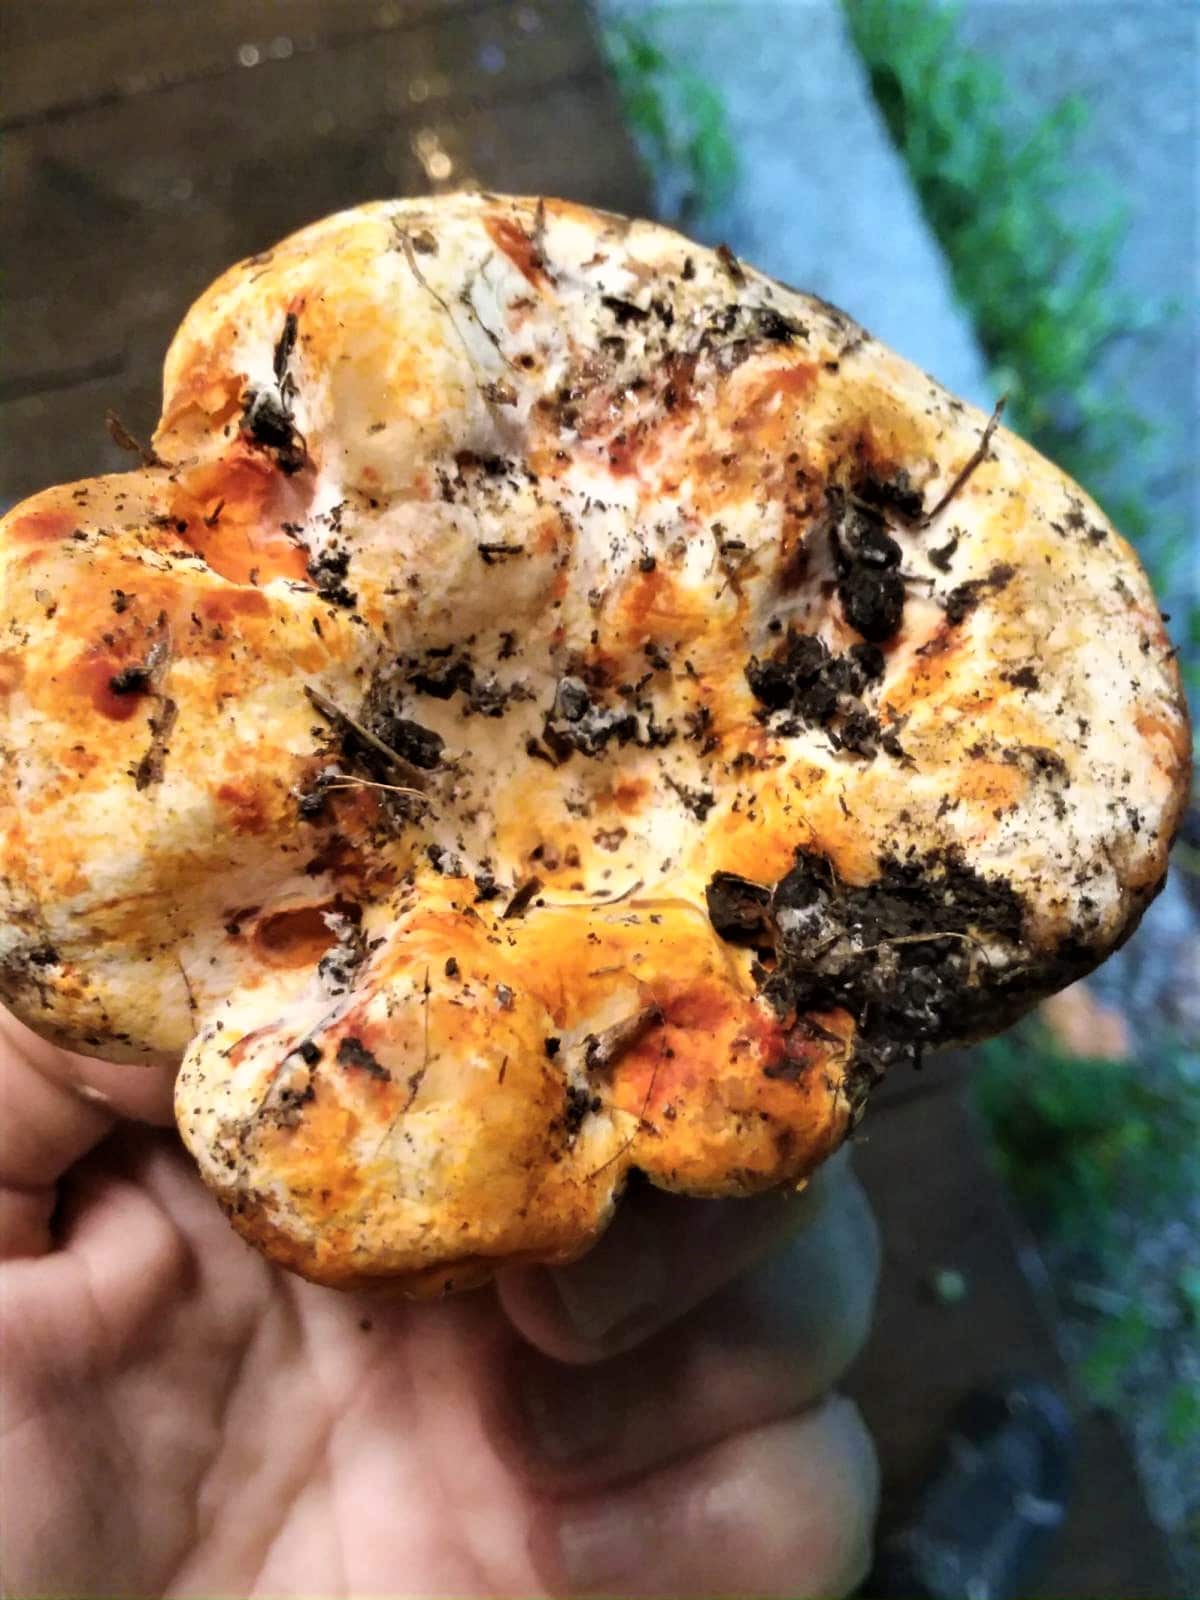 Top of a lobster mushroom with white mold